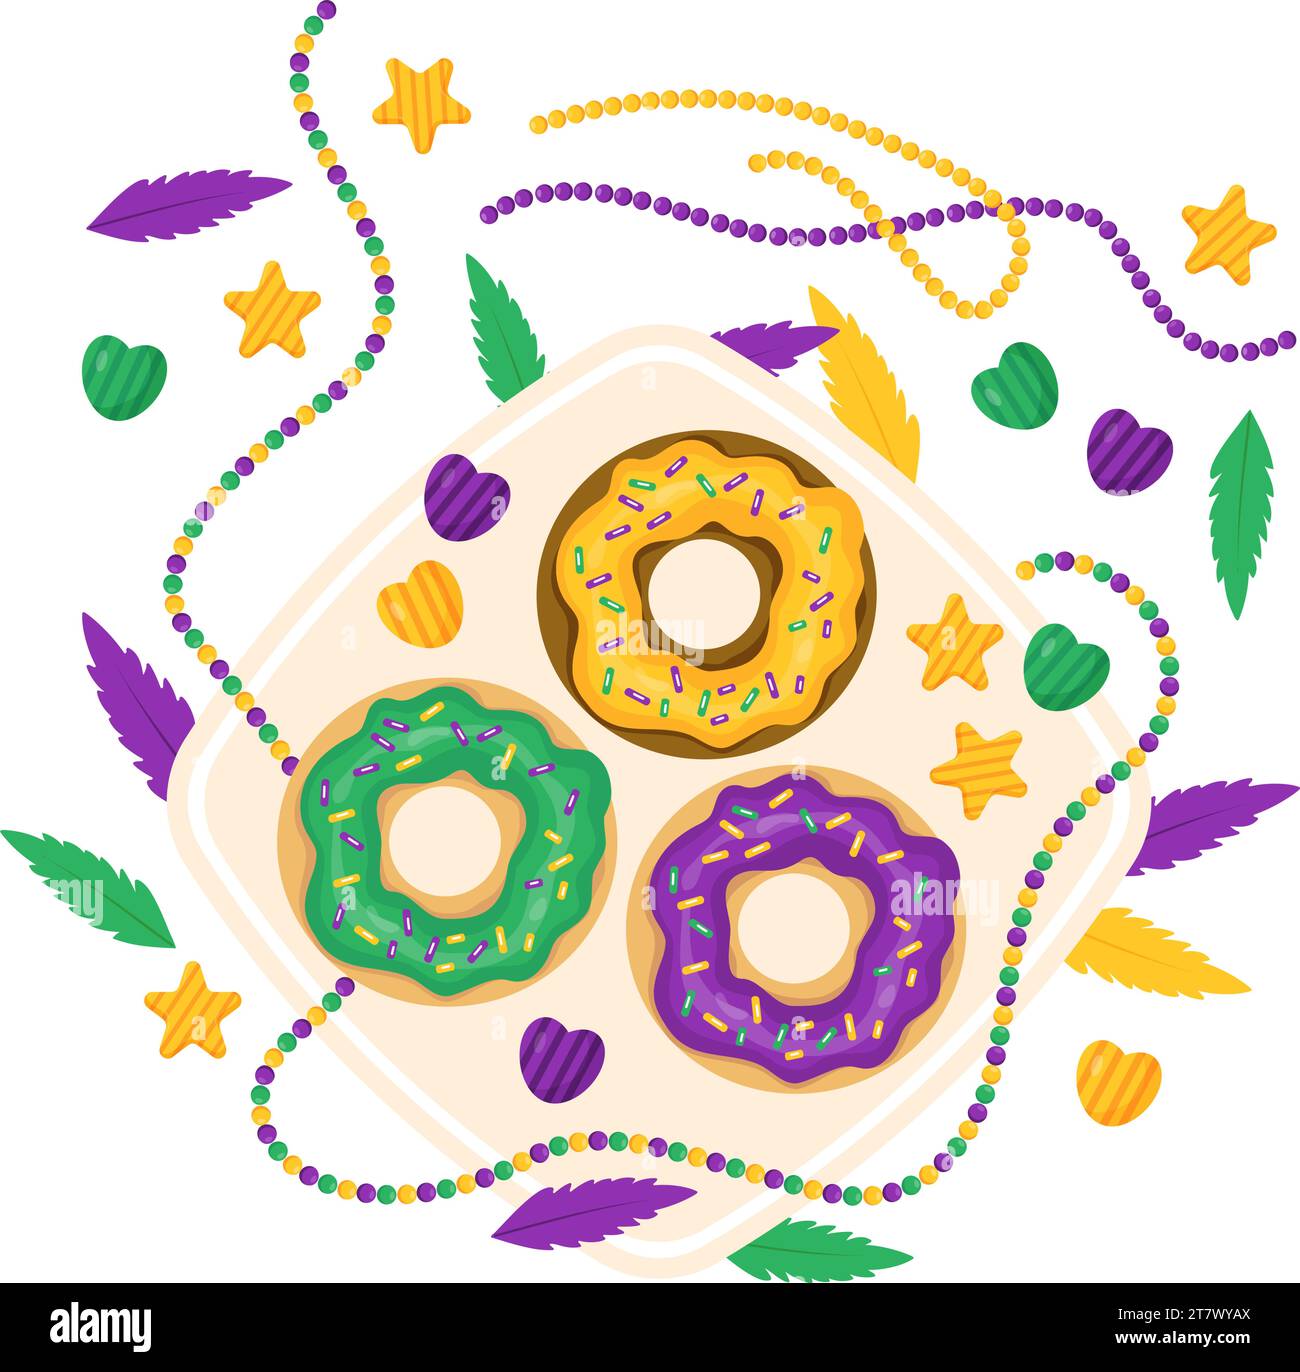 King Cake. Festive Donuts with colorful icing, beaded necklaces, feathers on plate. Mardi Gras carnival. Holiday Fat Tuesday. Vector illustration in c Stock Vector